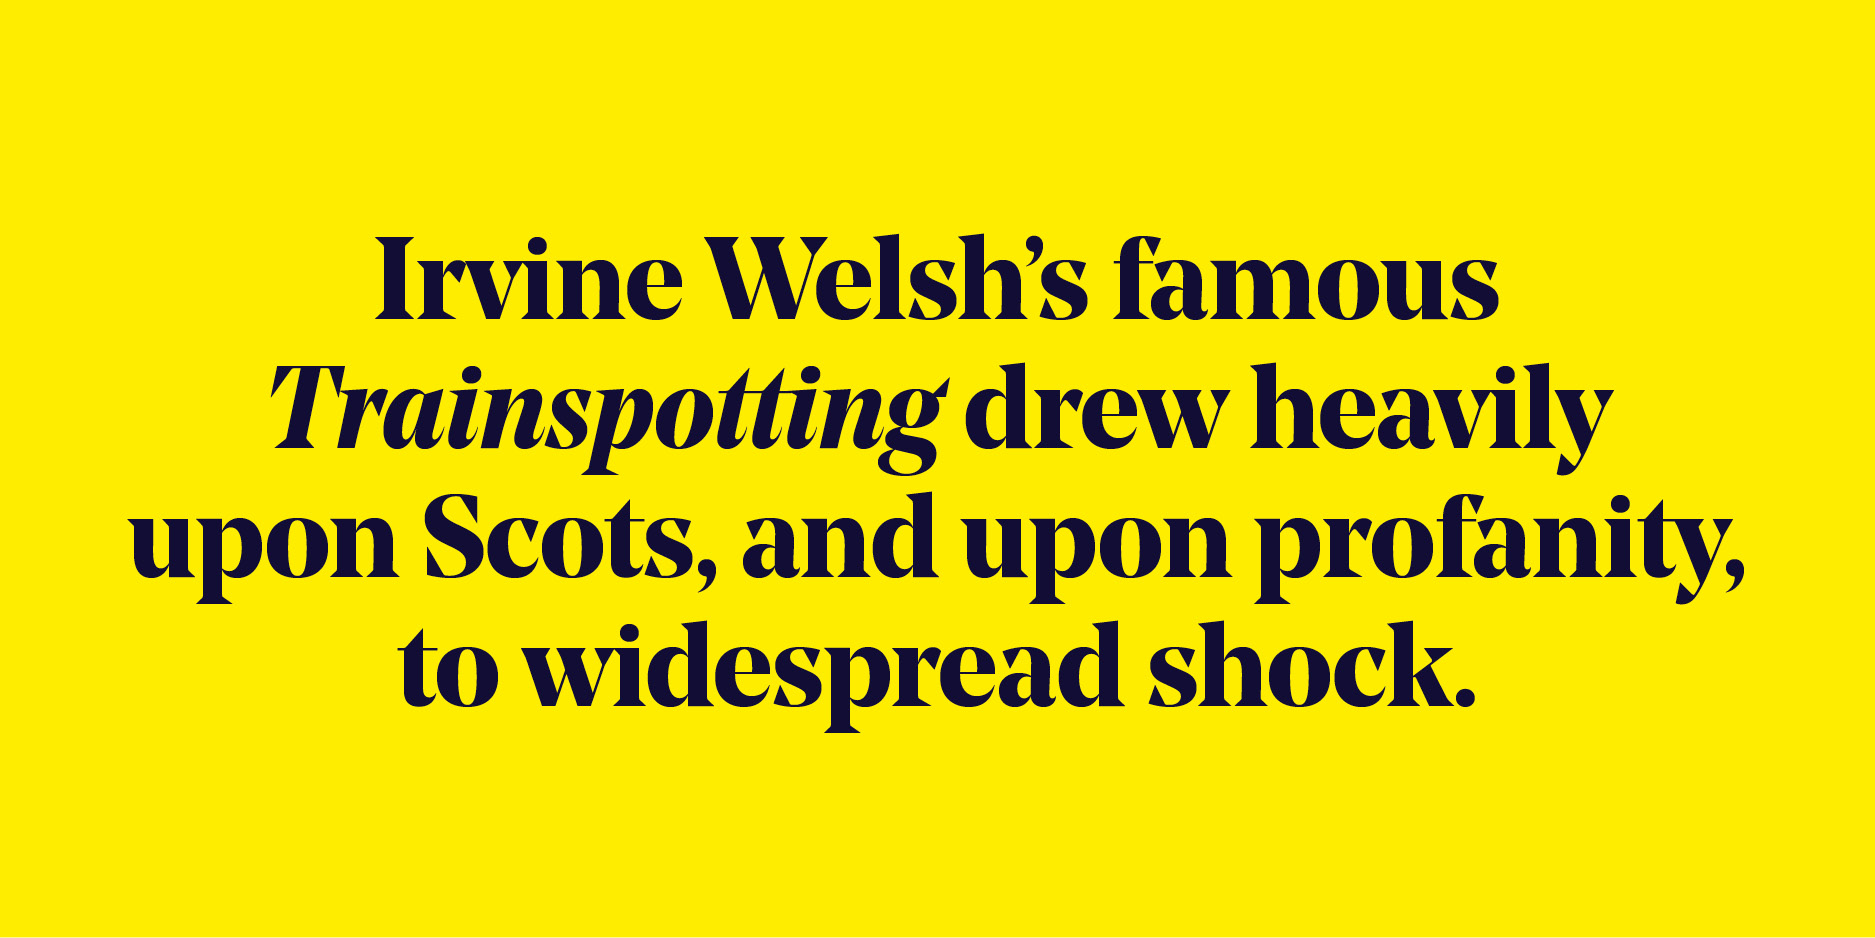 Quote: "Irvine Welsh's famous Trainspotting drew heavily upon Scots, and upon profanity, to widespread shock."